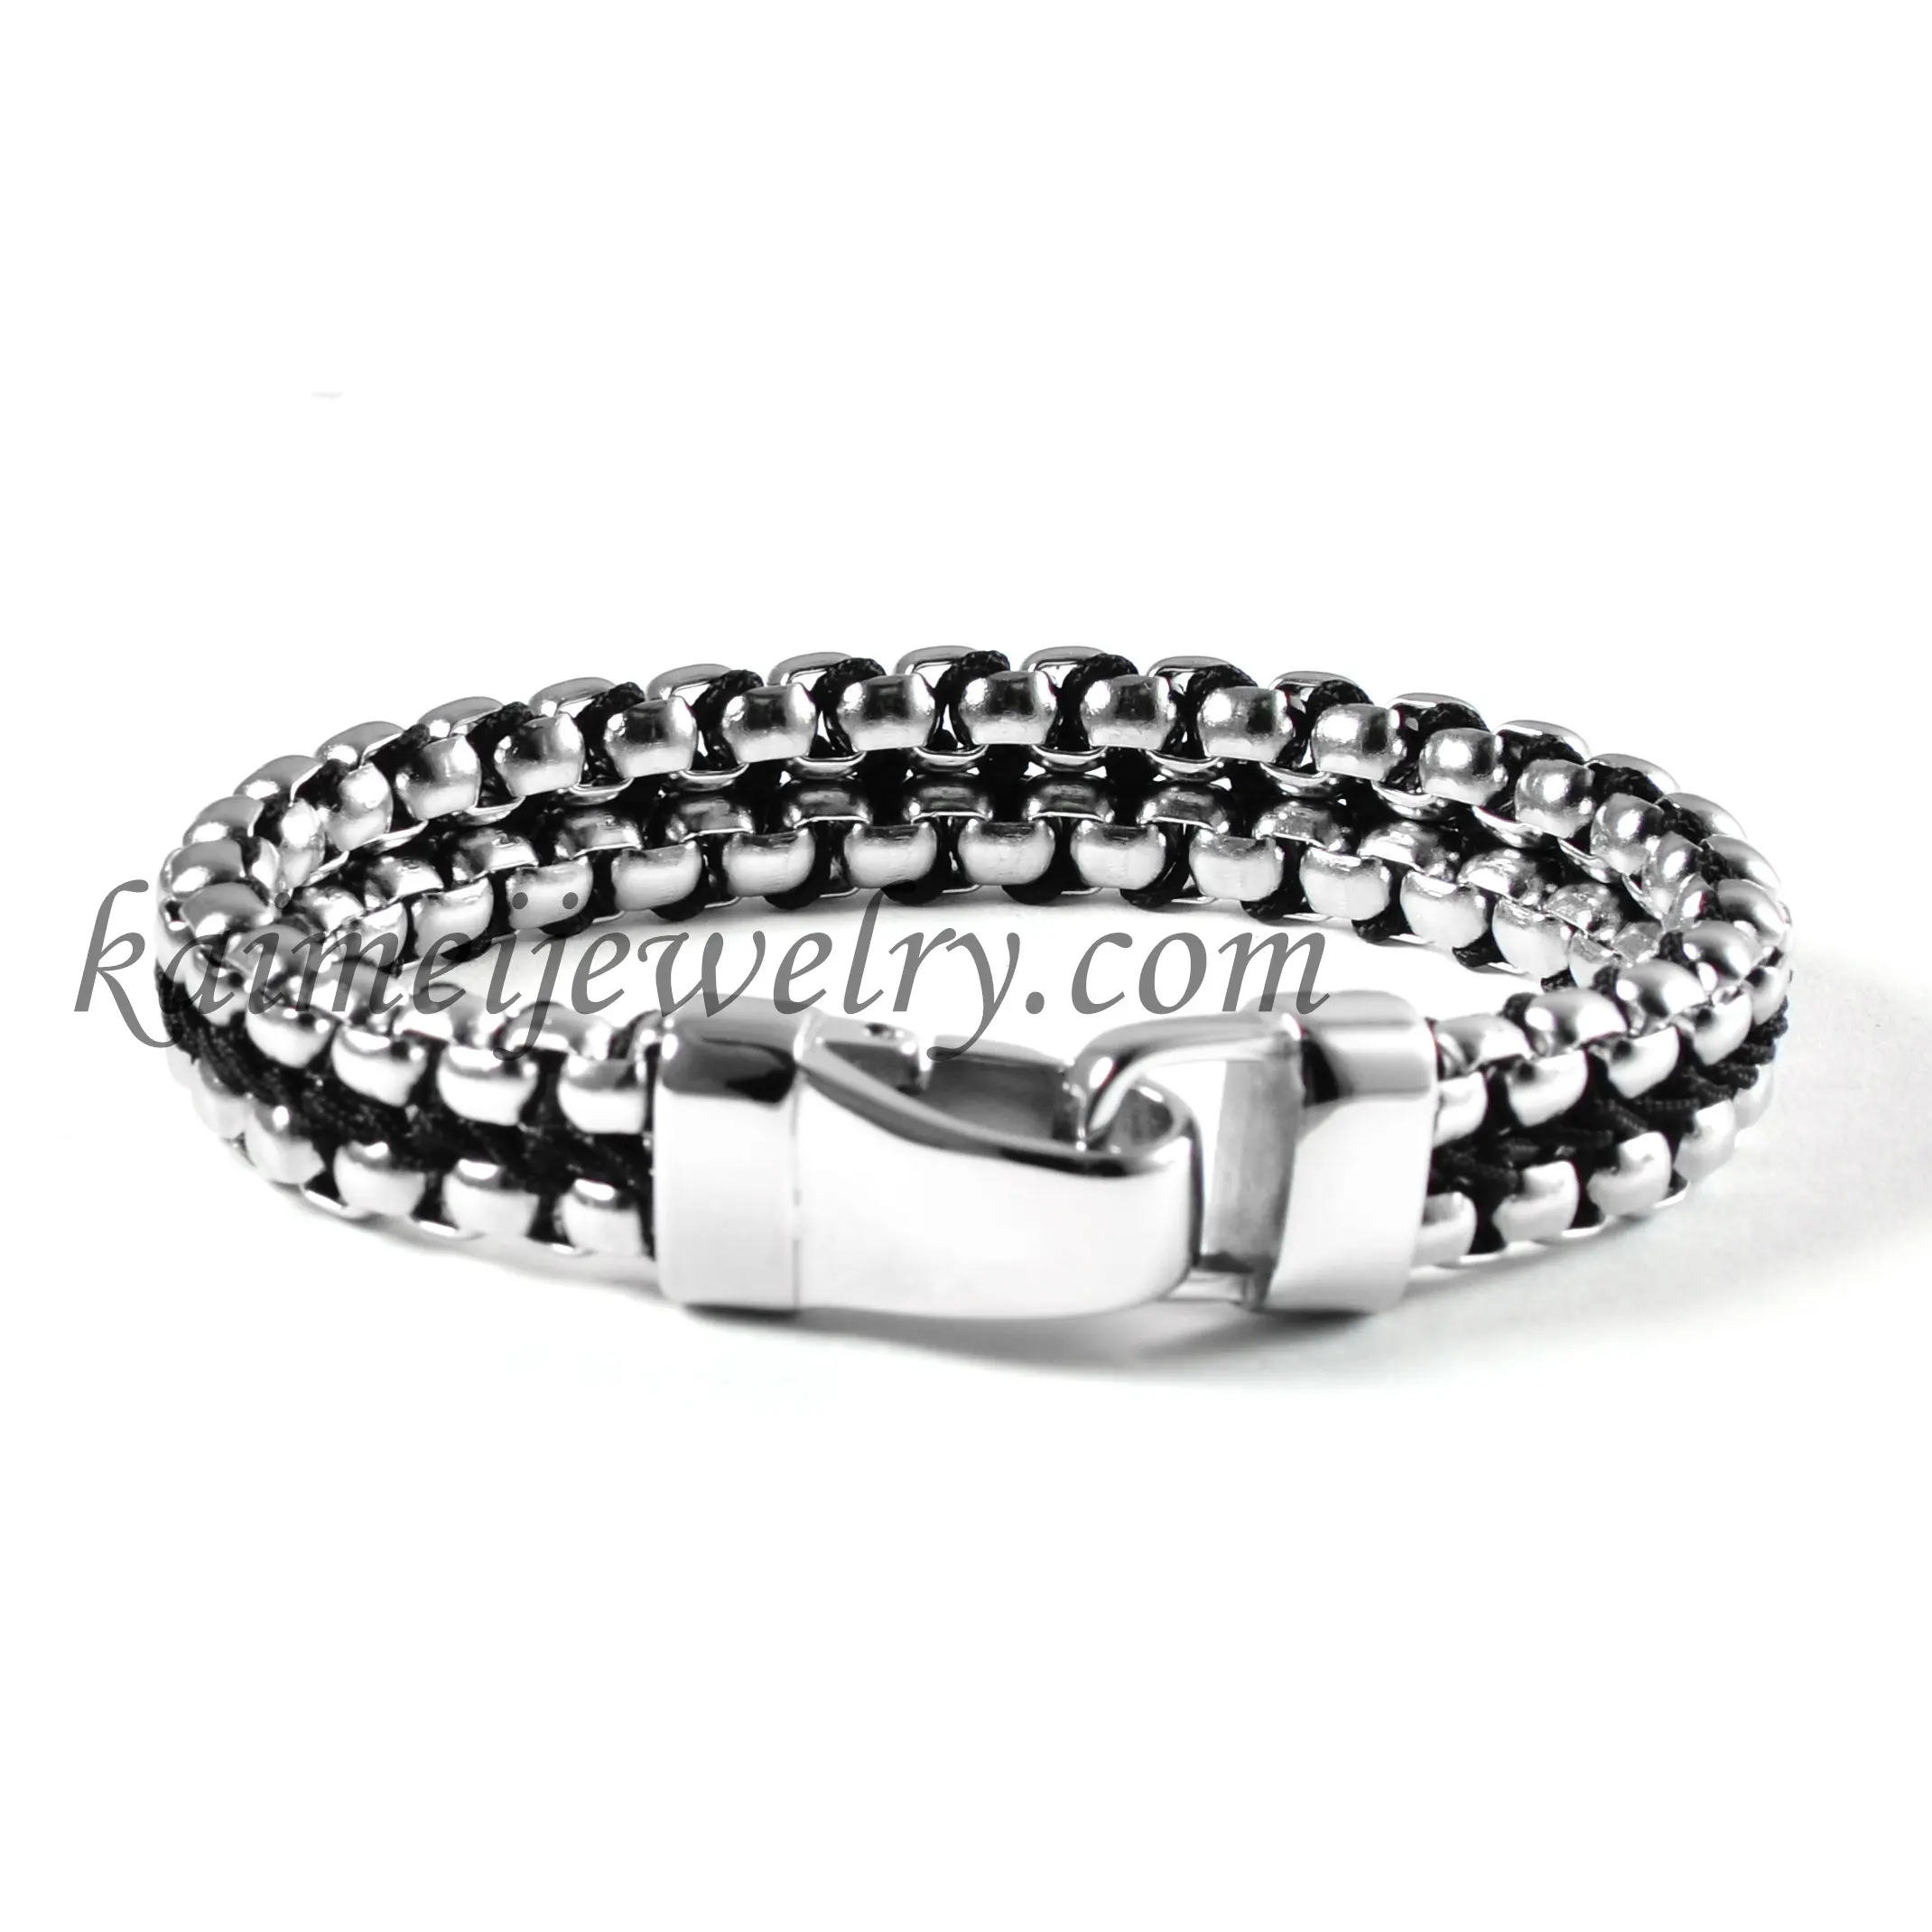 Silver Braided Chain Metal Bracelet Stainless Steel Lock Handmade Braided Bangles Punk Style Black Double Layer Men's Jewelry